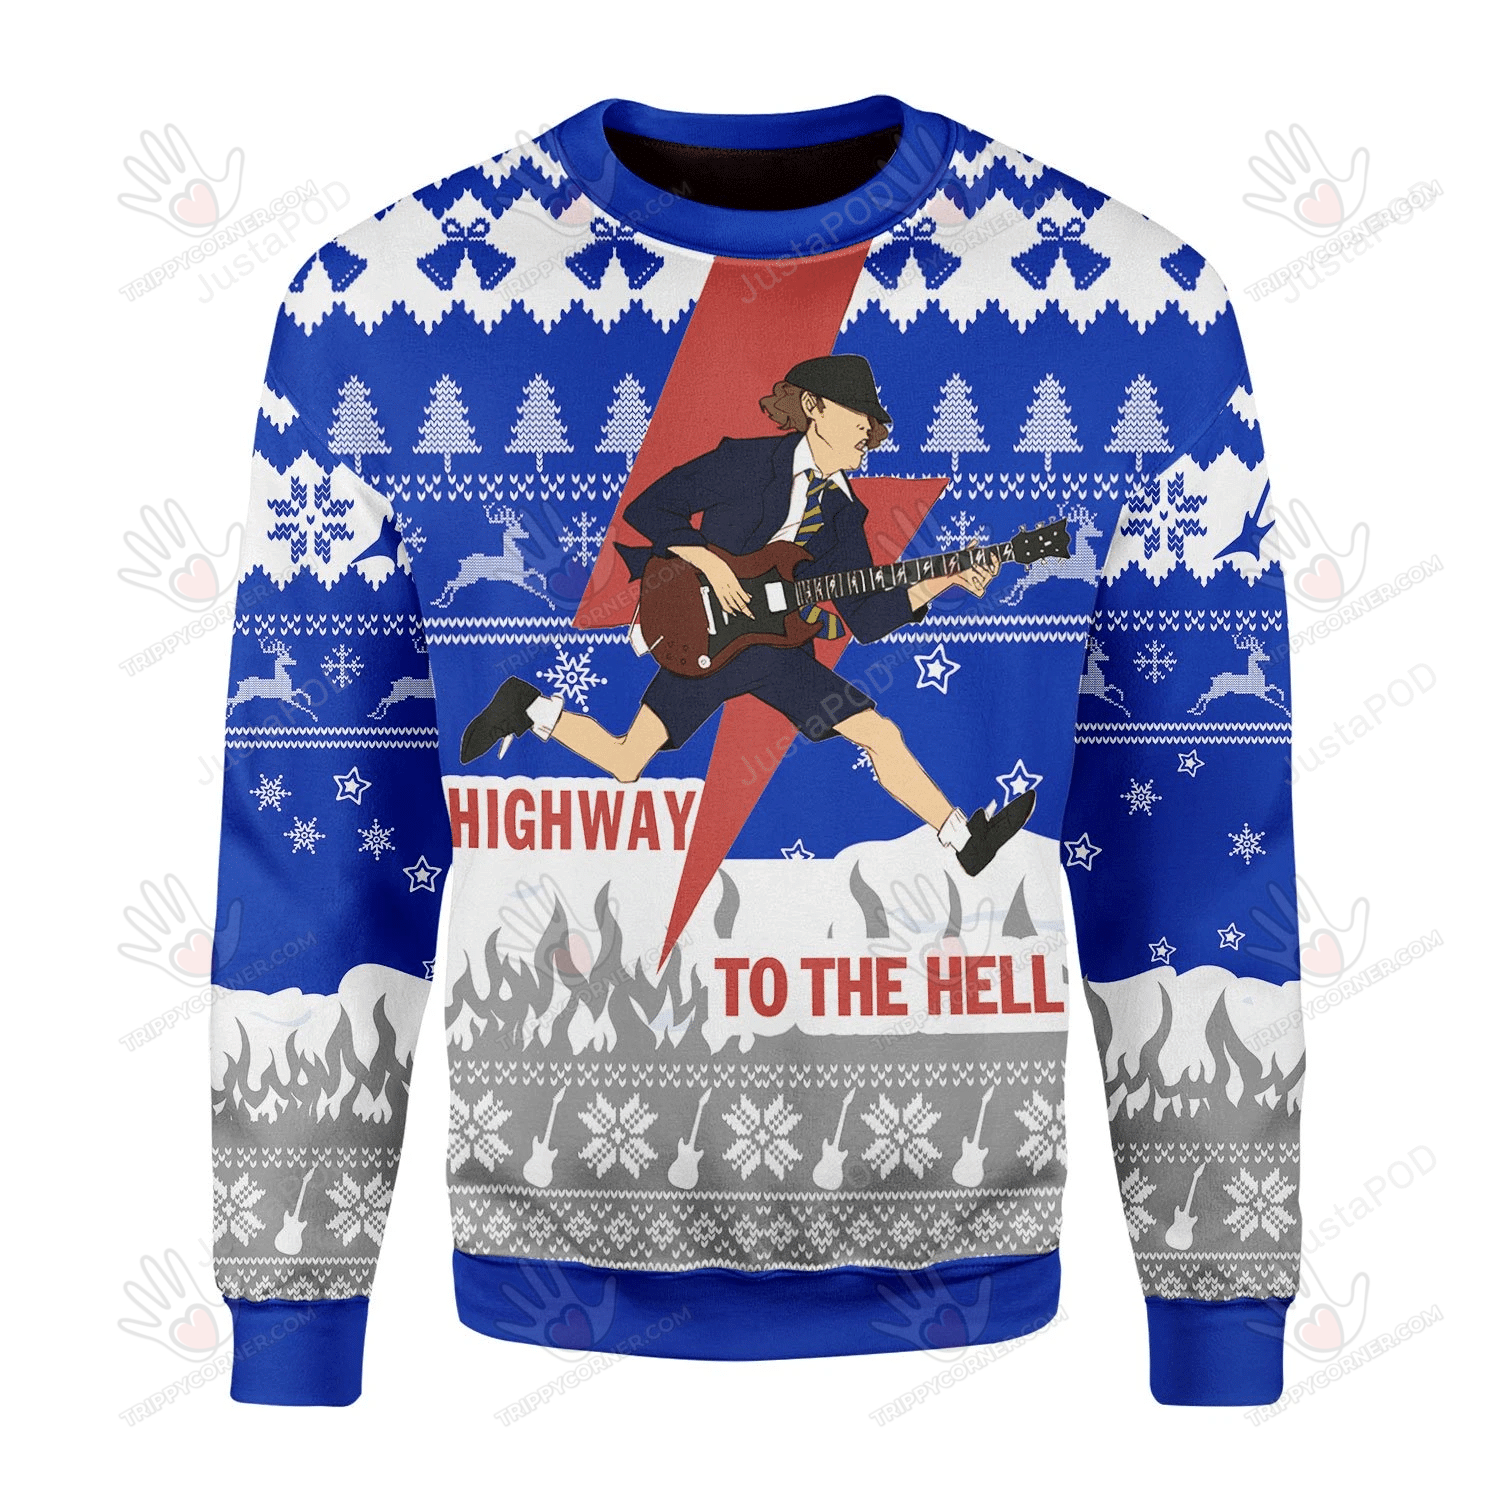 Highway To The Hell Ugly Christmas Sweater, All Over Print Ugly Sweater Christmas Gift   878